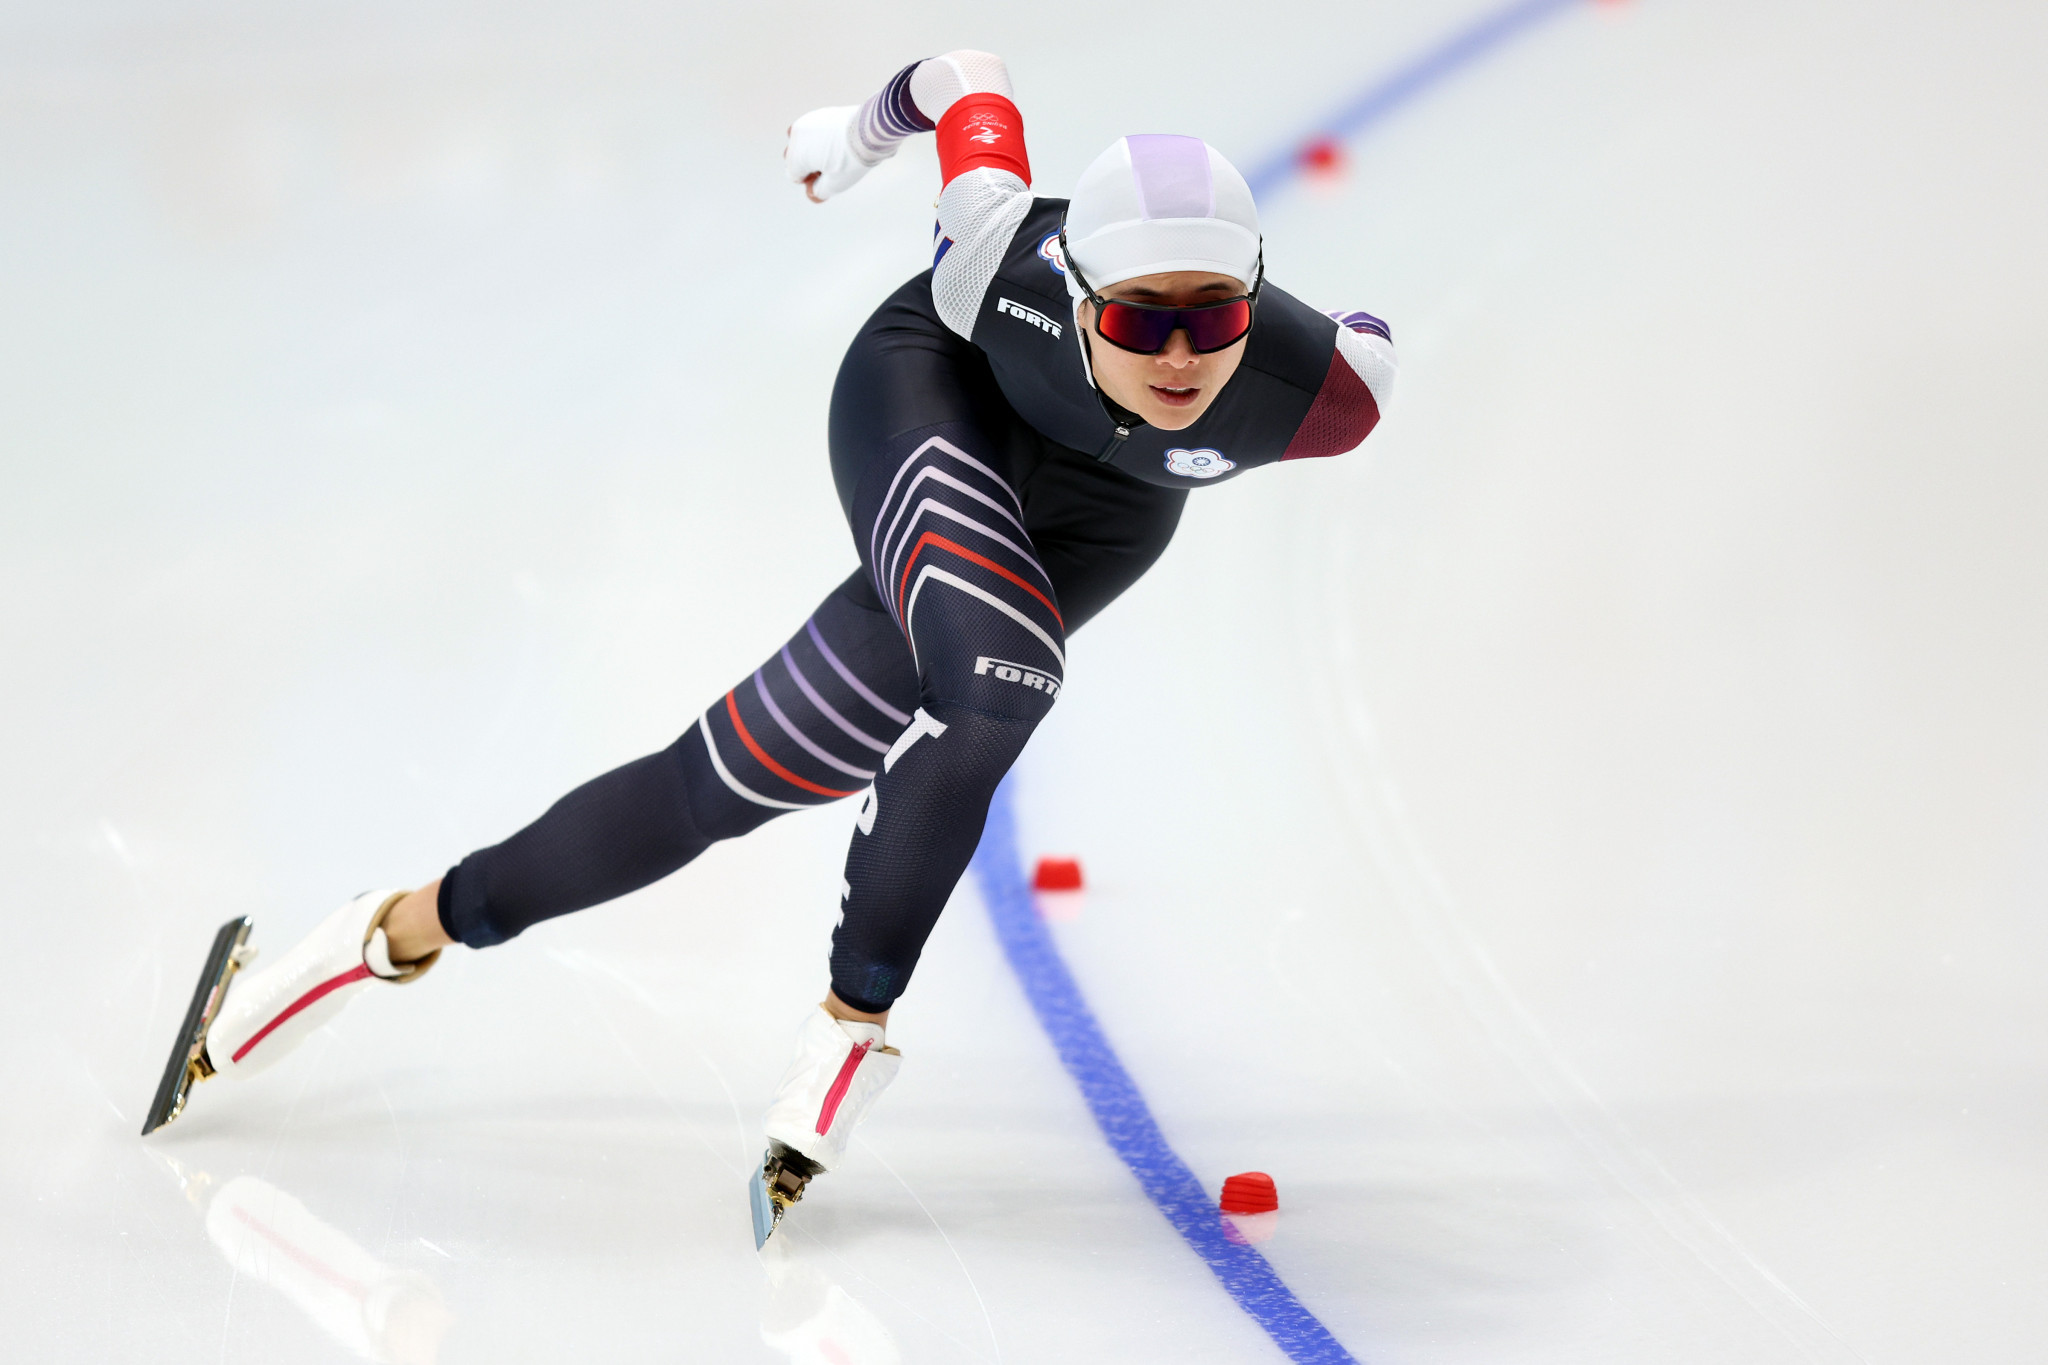 A video showing speed skater Huang Yu-ting wearing China's uniform prior to Beijing 2022 sparked controversy in Taiwan ©Getty Images